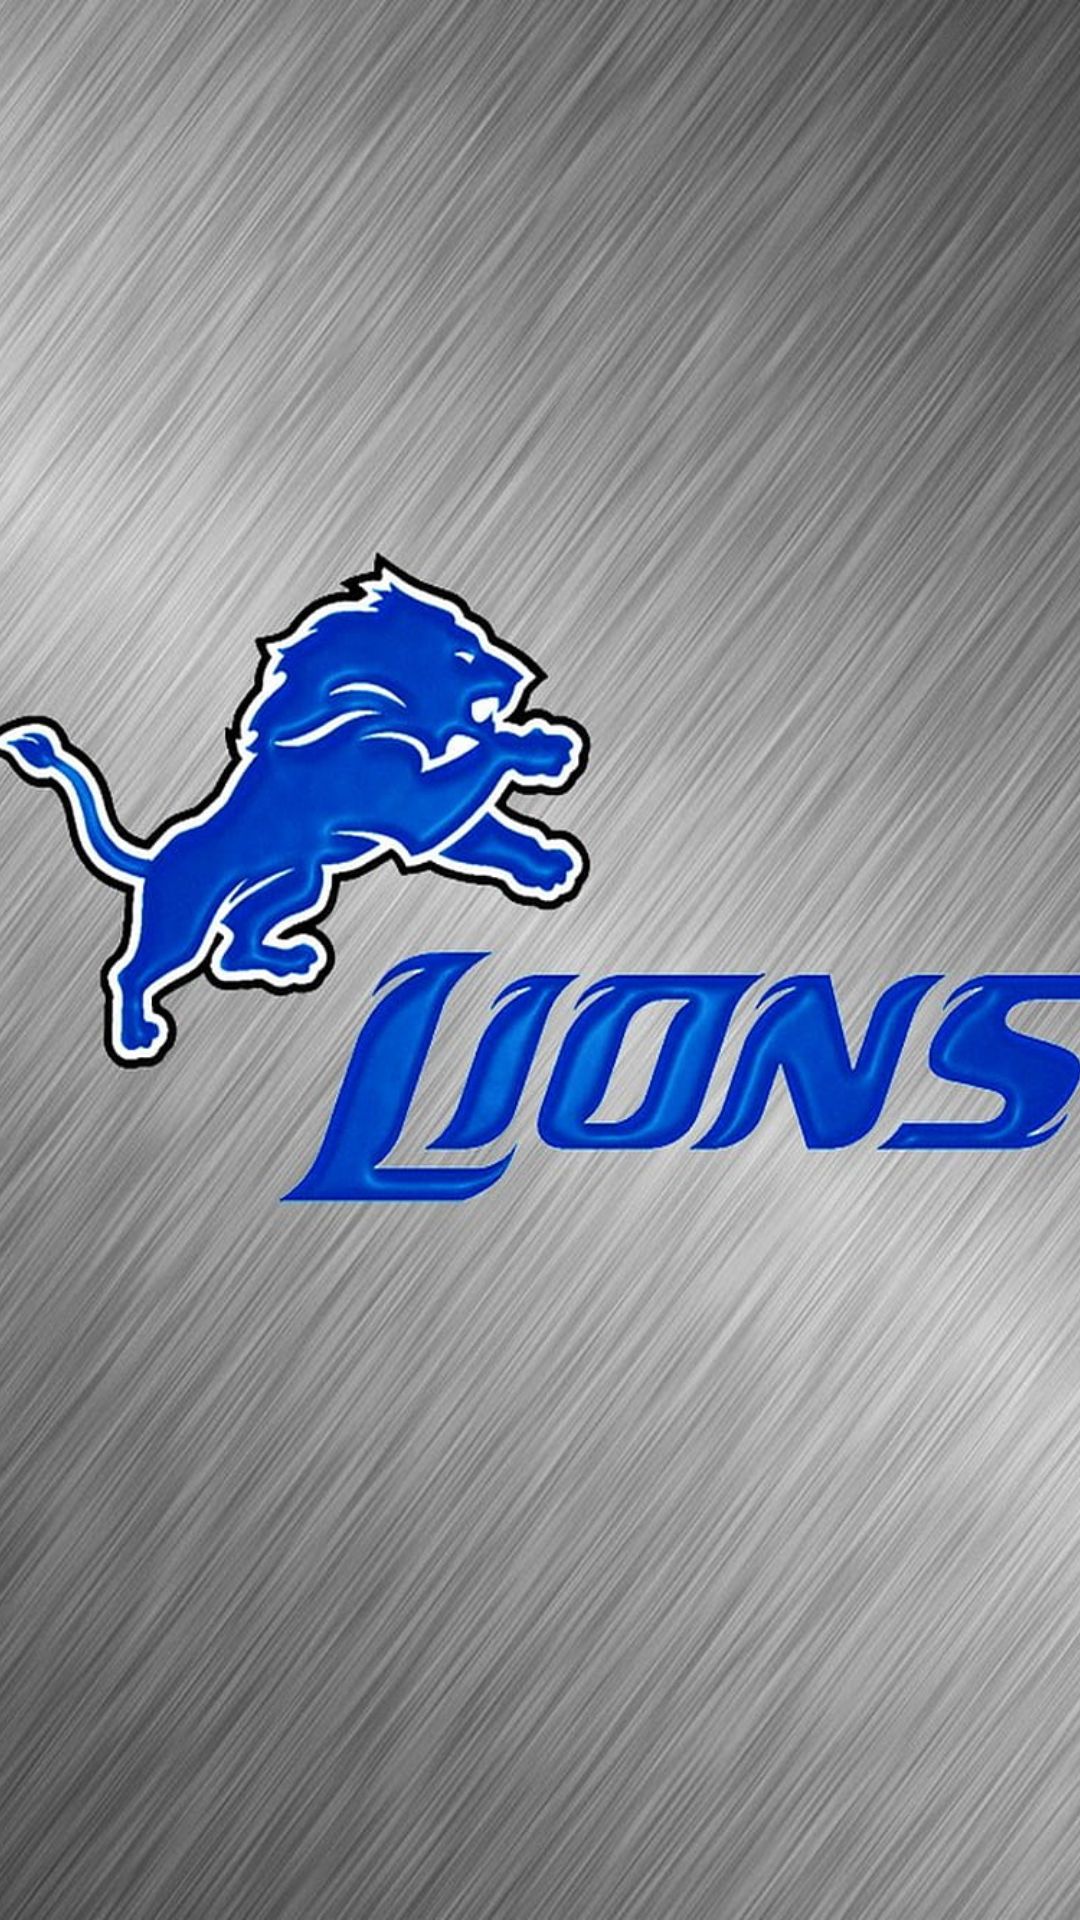 lions rugby logo wallpaper